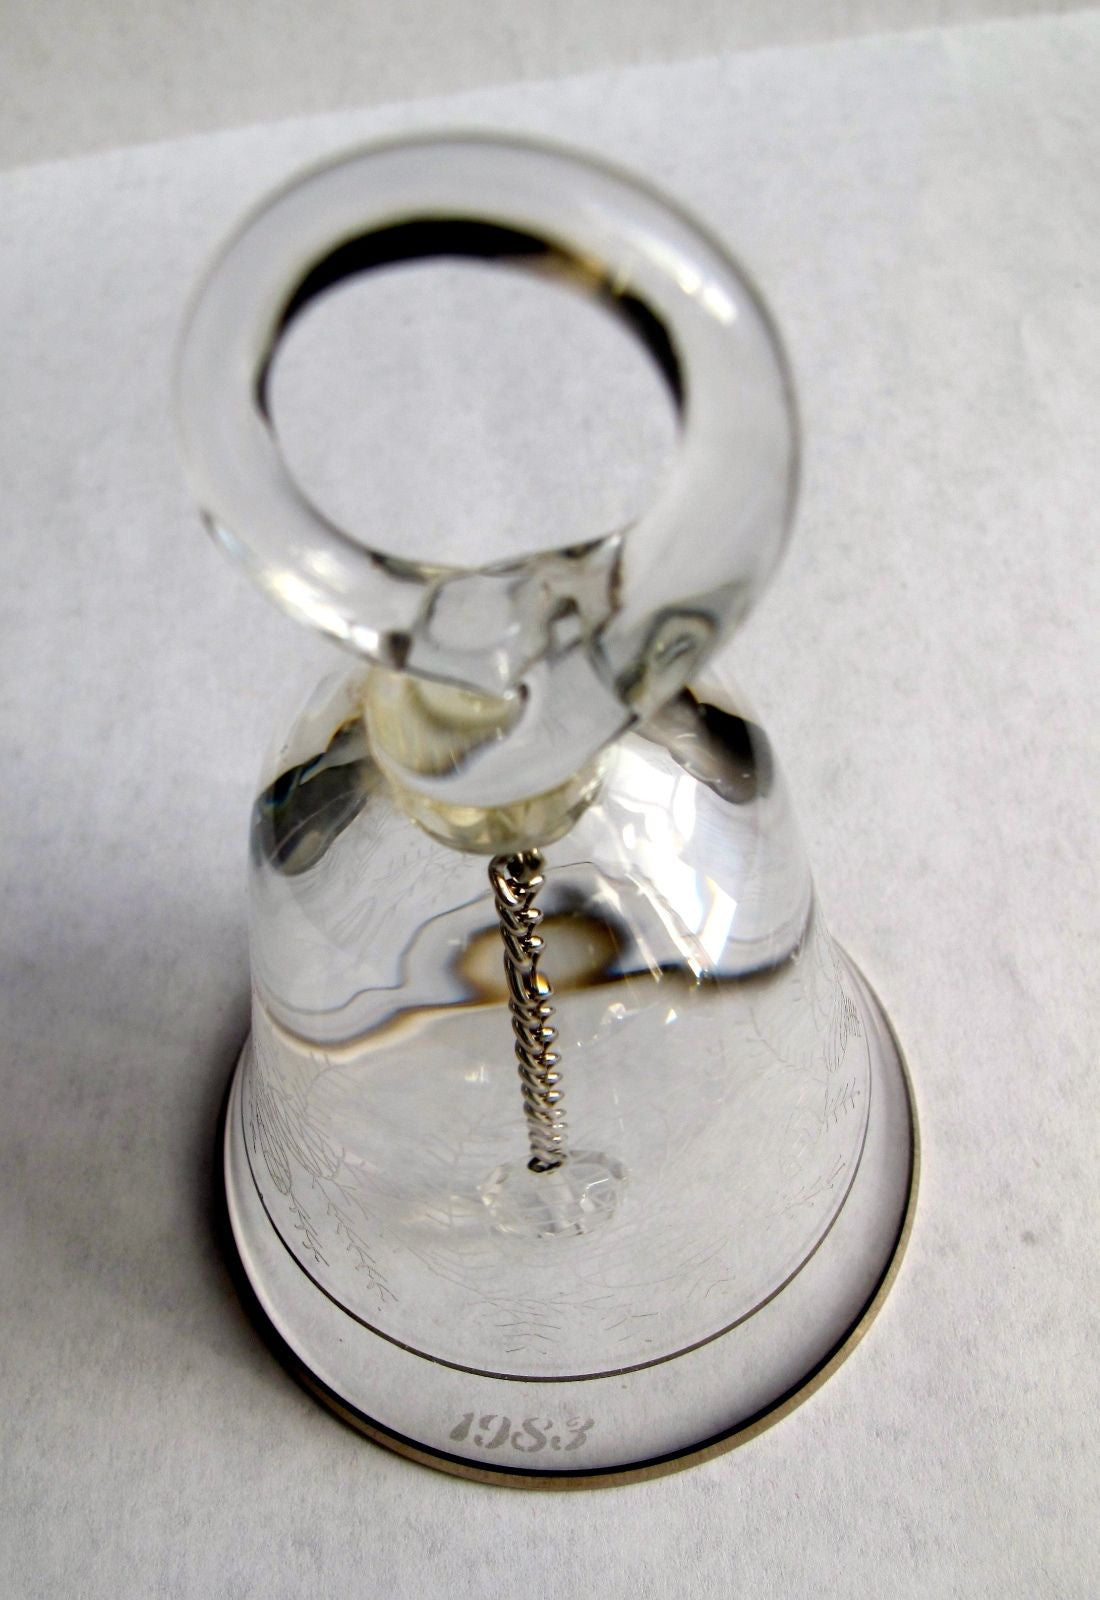 Lenox Crystal 1983 Acorn  miniature bell ornament Made in USA - O'Rourke crystal awards & gifts abp cut glass